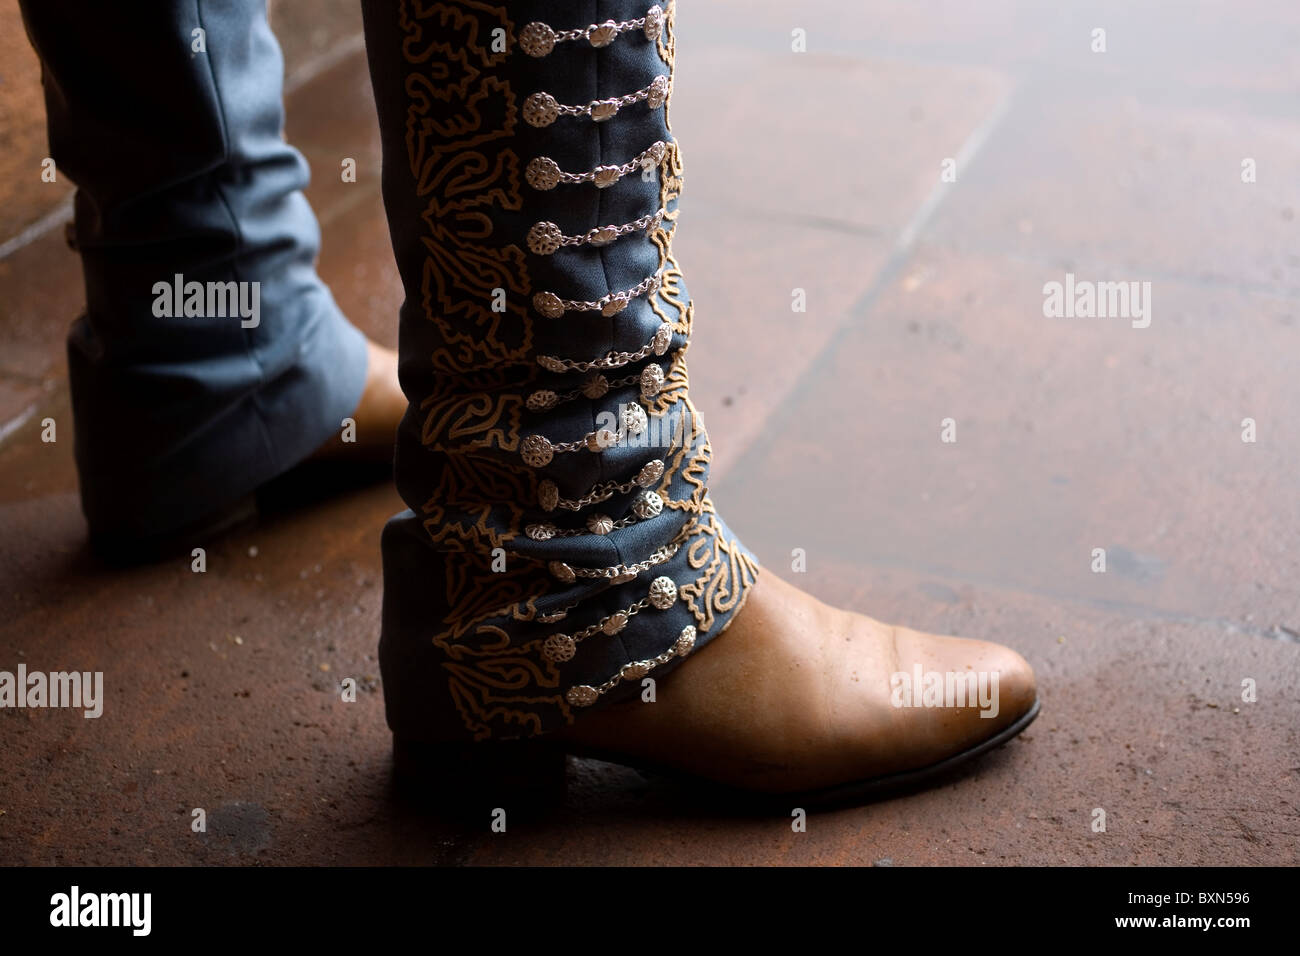 A charro wears silver decorated pants and boots during a charreria competition in Mexico City Stock Photo